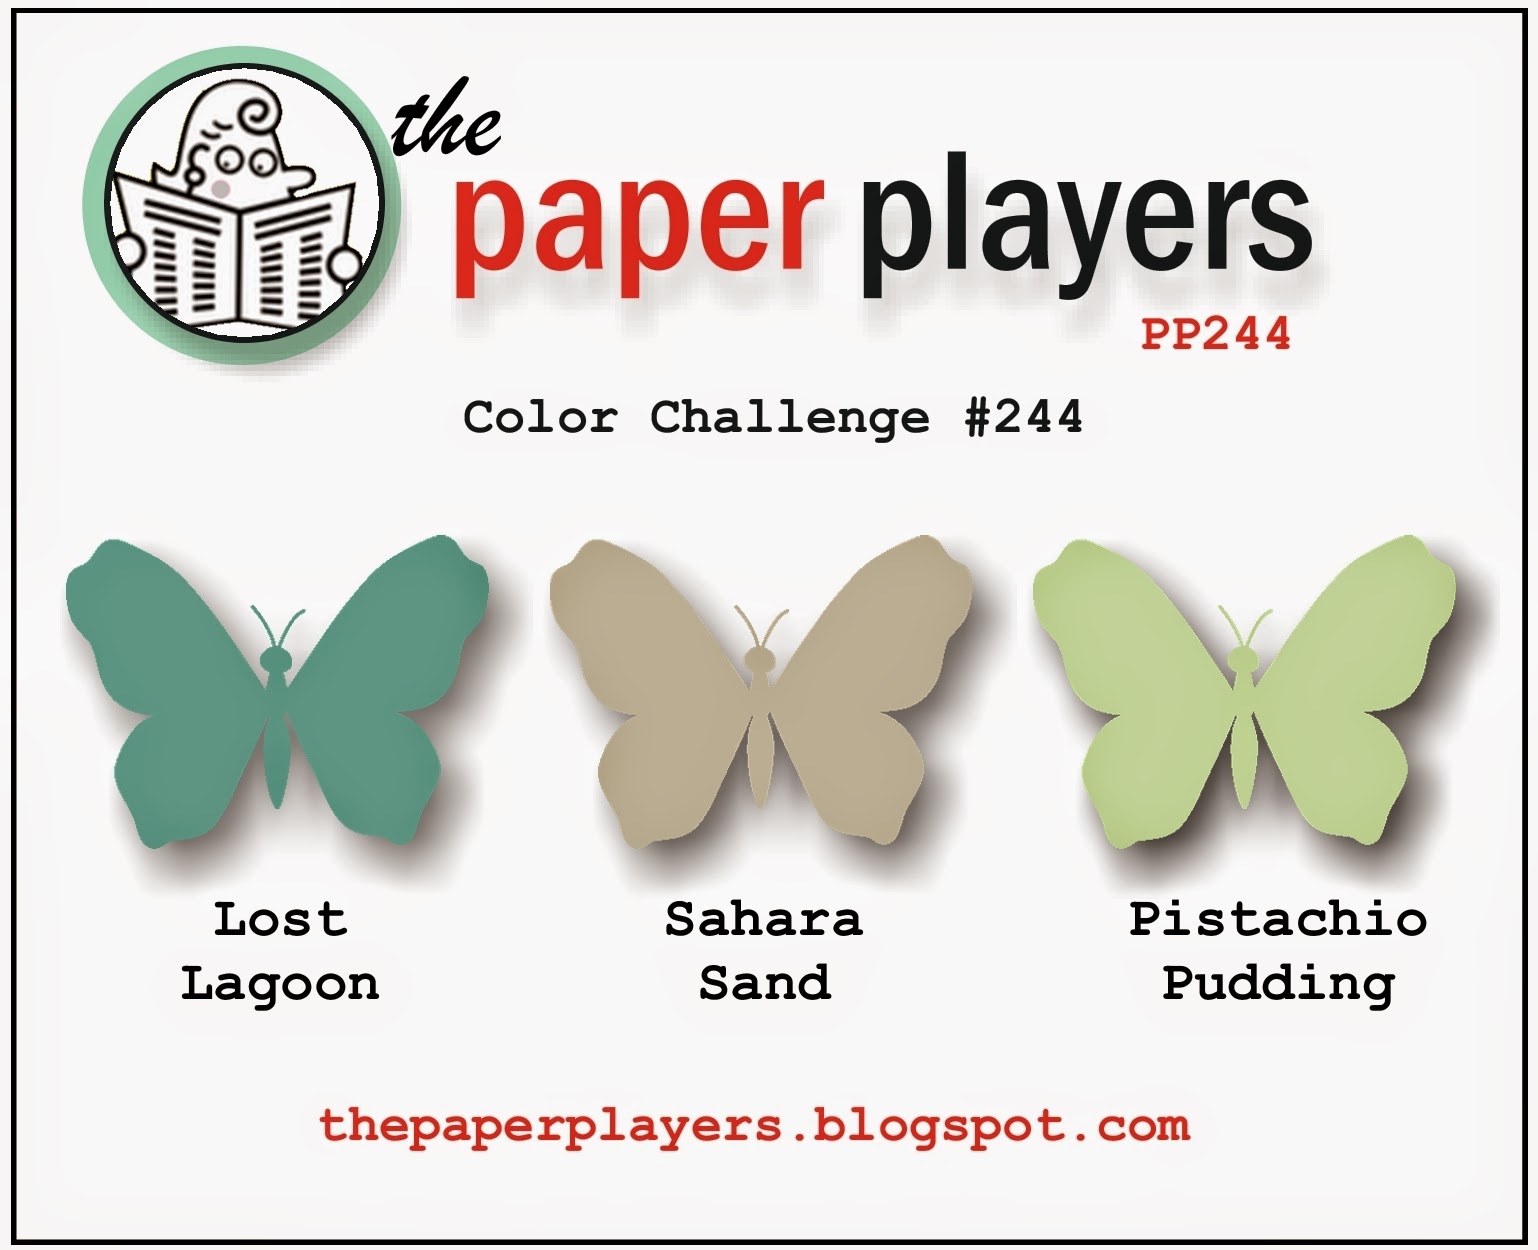 Playing paper. Paper cool Life. Family Play paper Color.